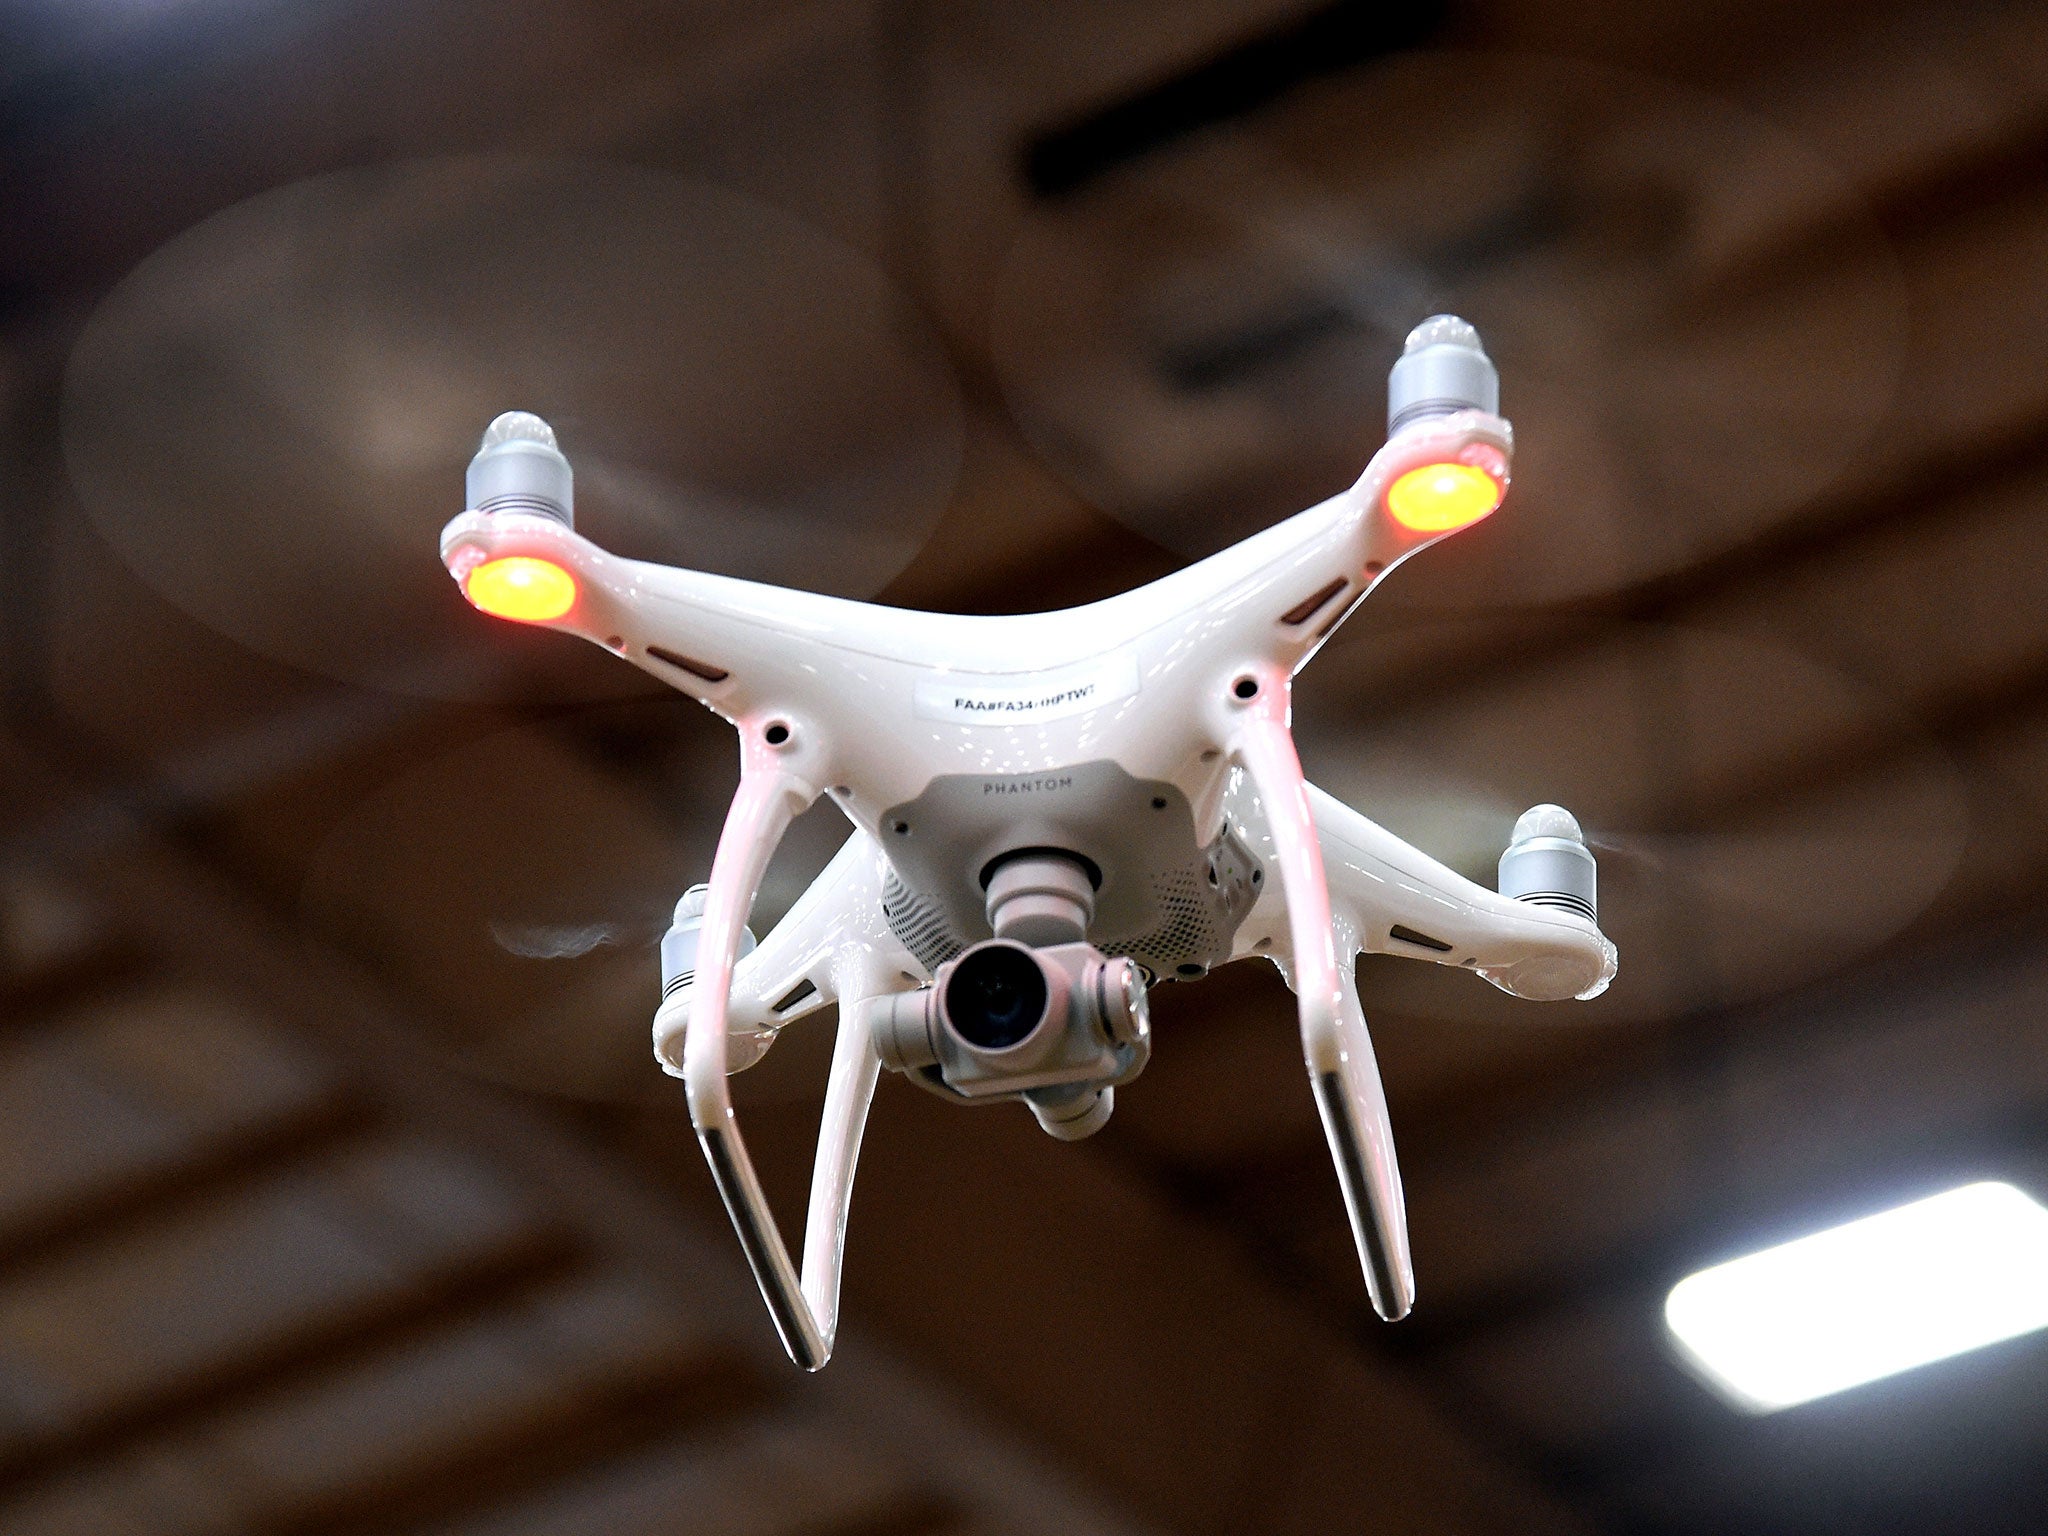 Currently drones are commercially available to buy commercially at high street electronics stores and online